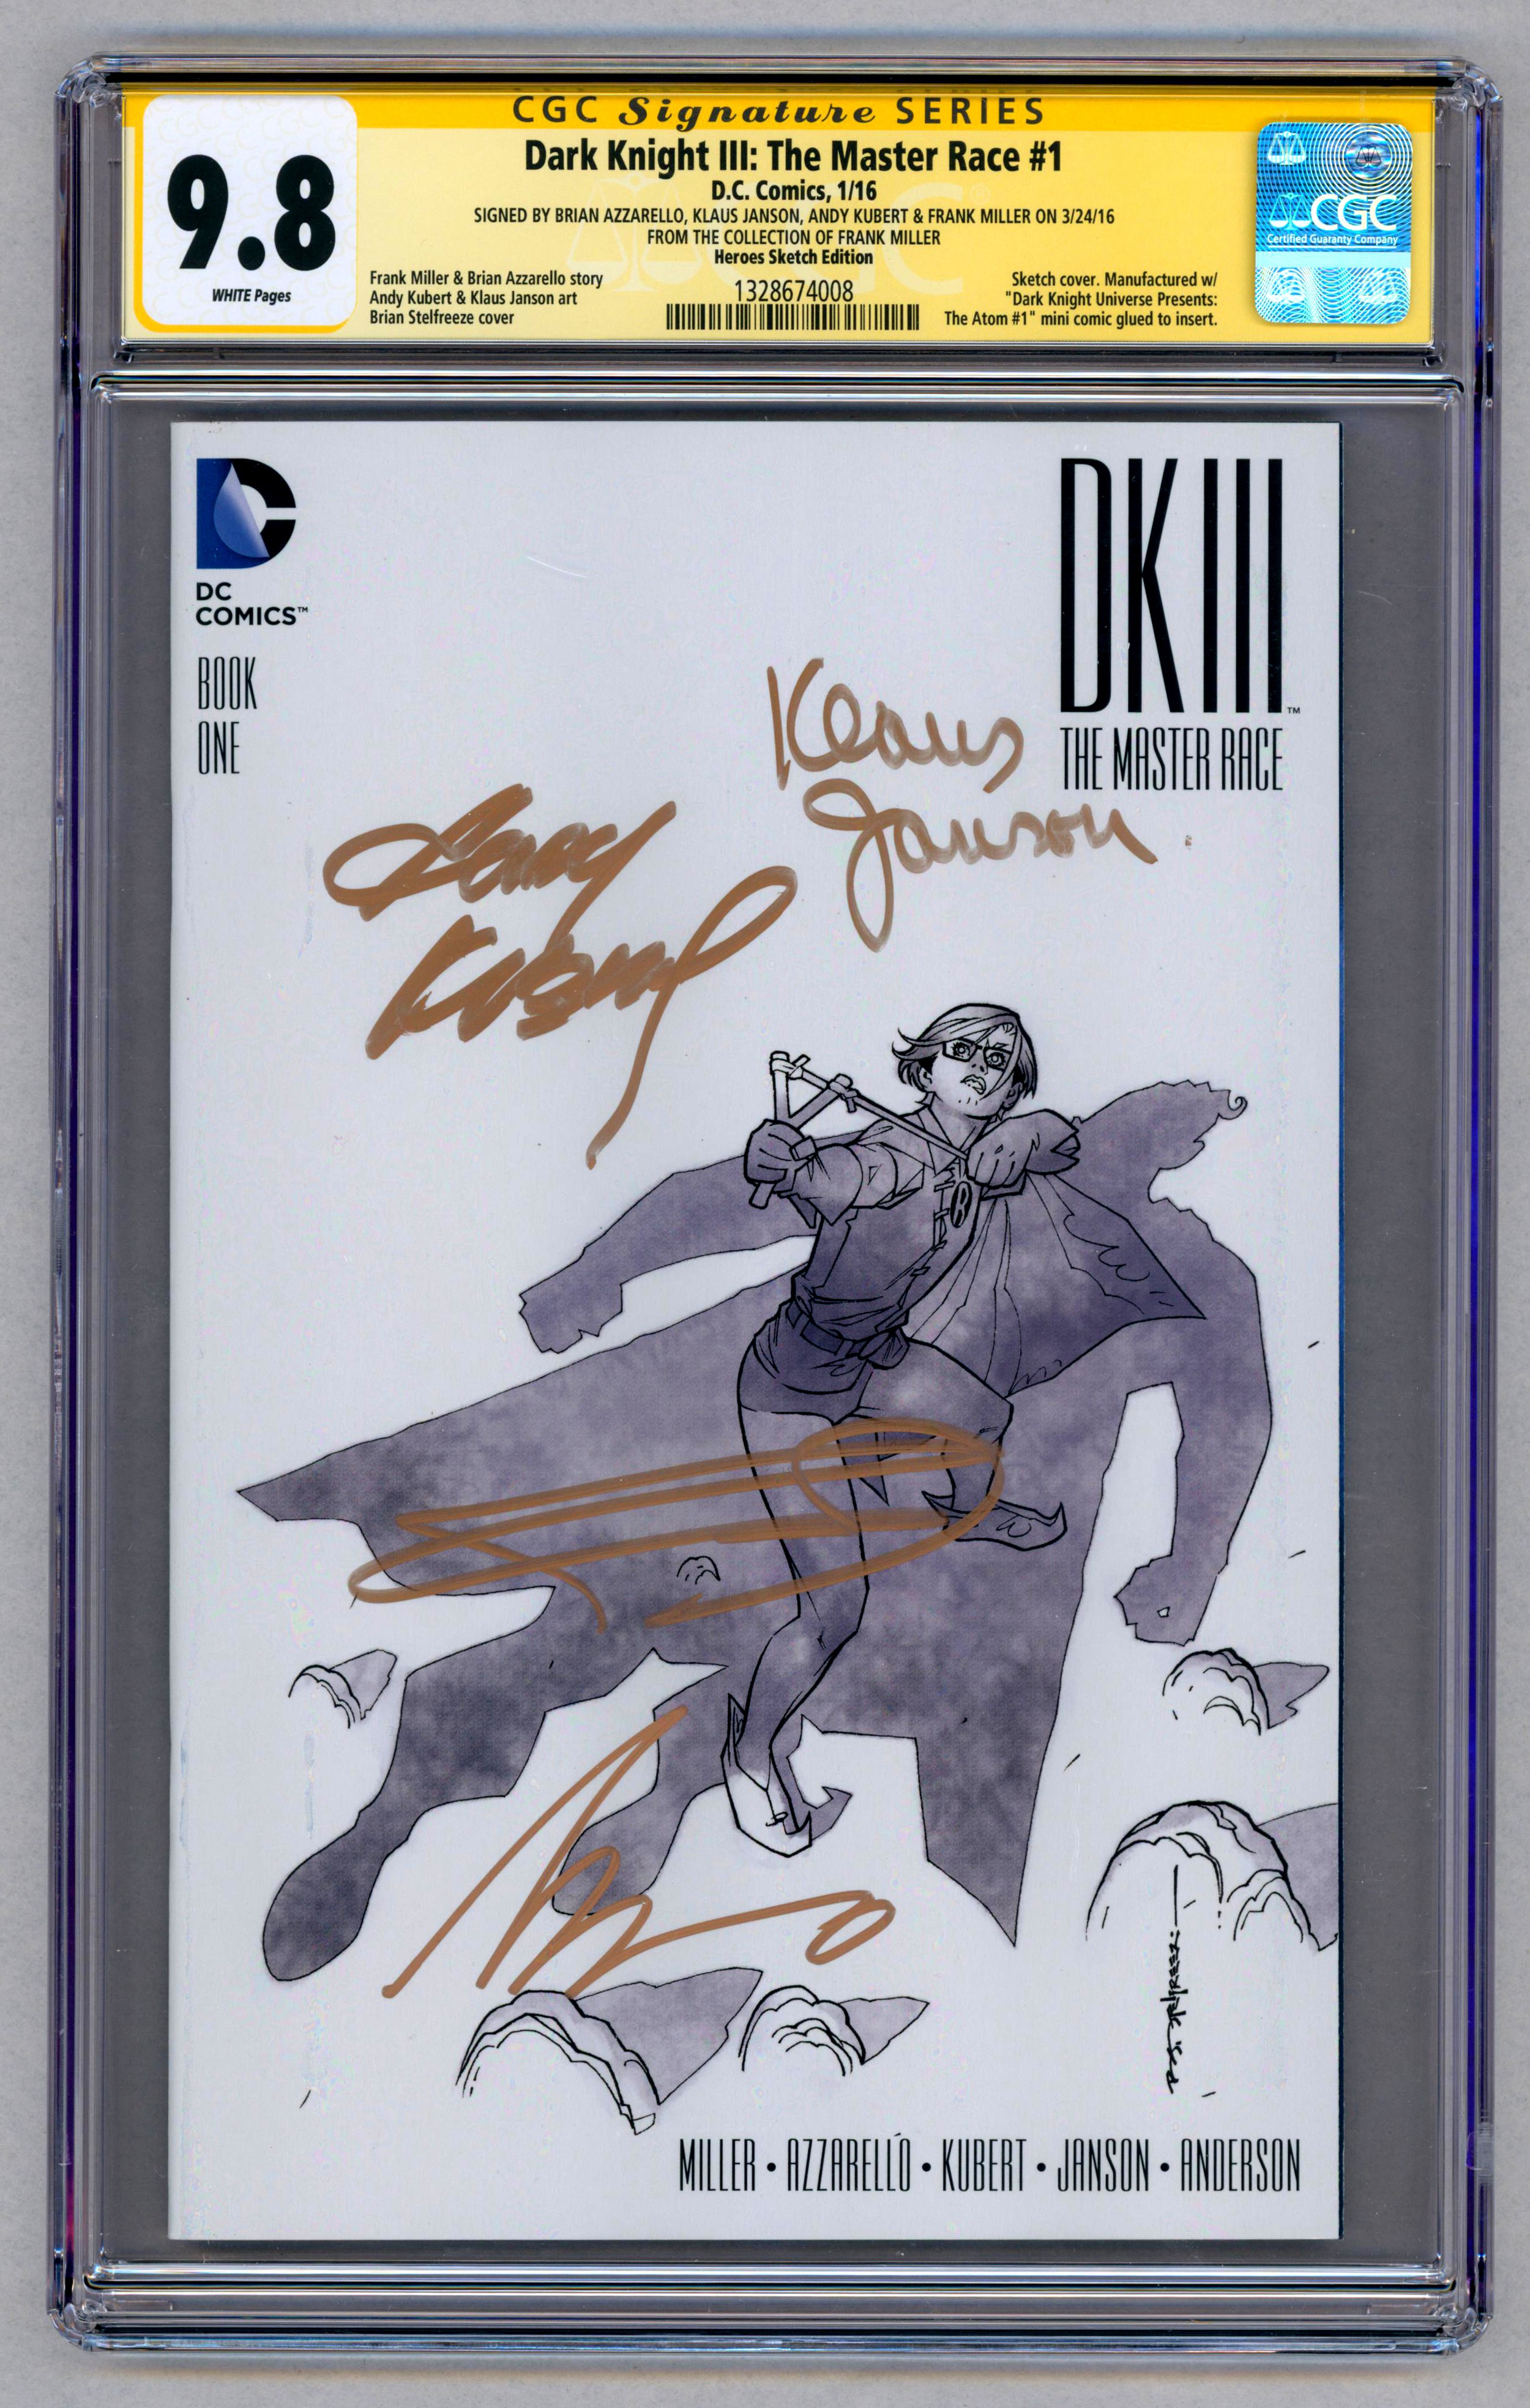 DARK KNIGHT 111: THE MASTER RACE #1-(December 2015)- Graded 9.8 by CGC. Sketch cover. Manufactured